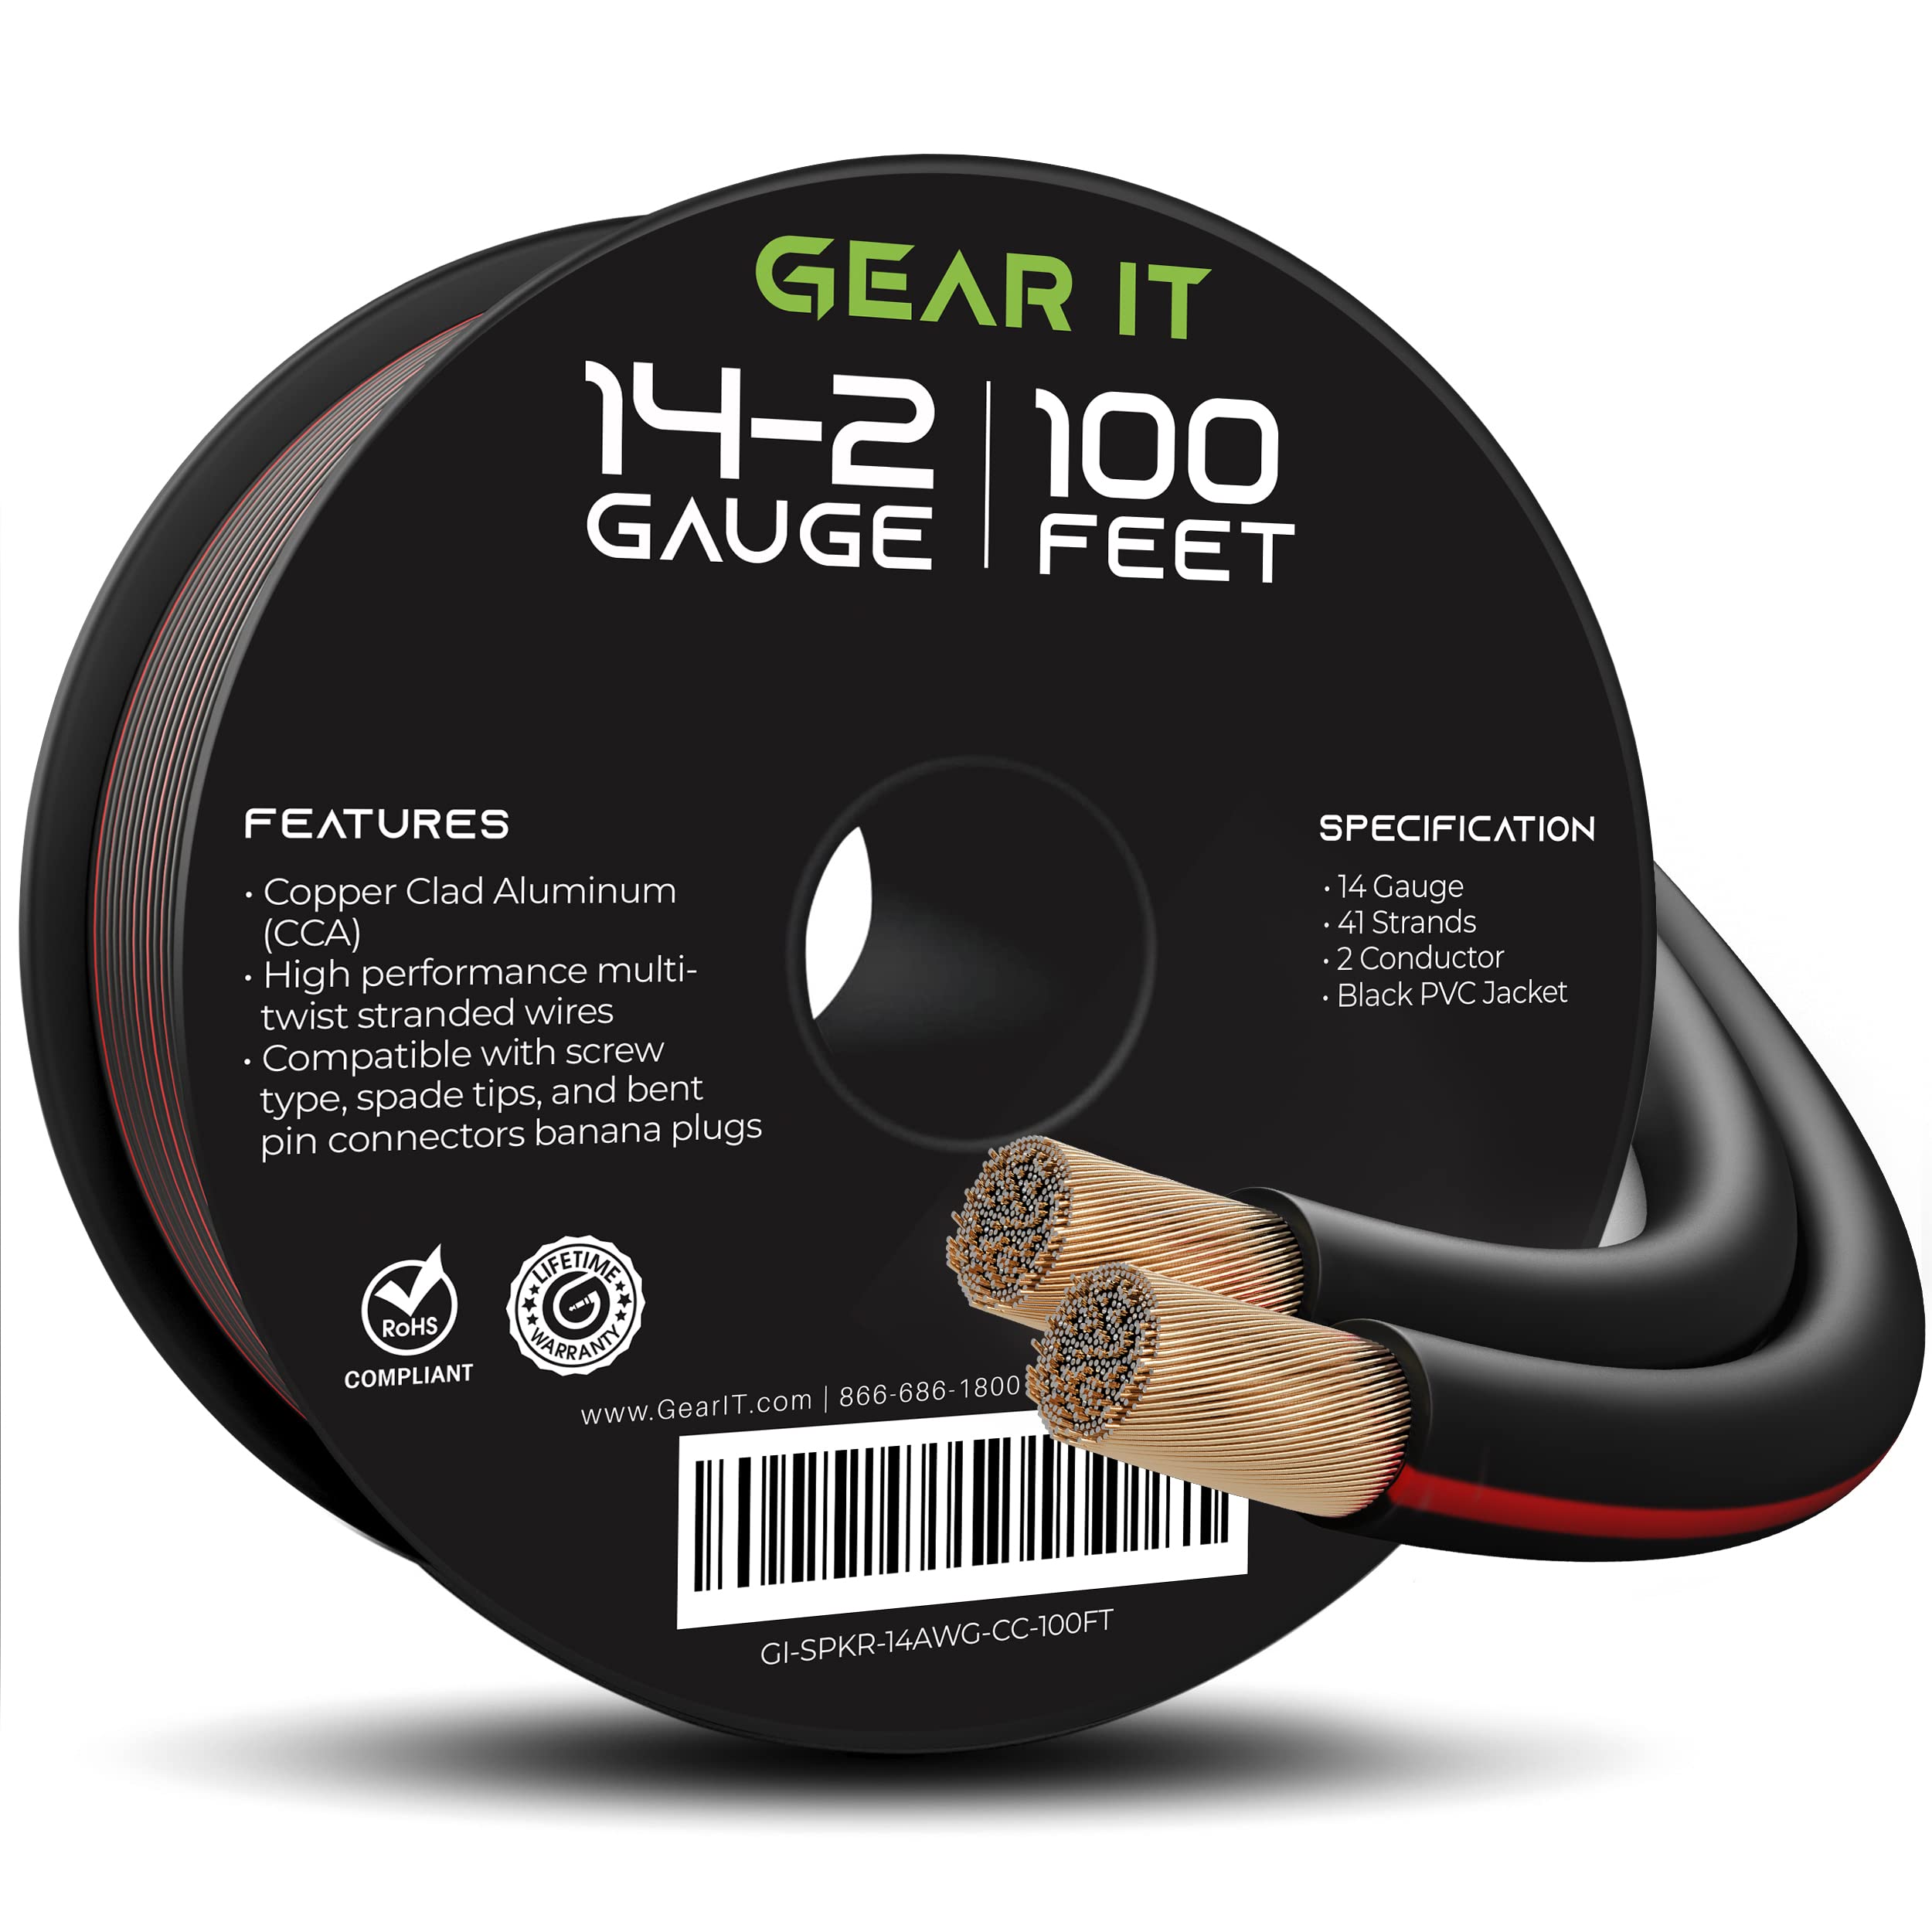 Book Cover 14AWG Speaker Wire, GearIT Pro Series 14 AWG Gauge Speaker Wire Cable (100 Feet / 30.48 Meters) Great Use for Home Theater Speakers and Car Speakers Black 100 Feet Black